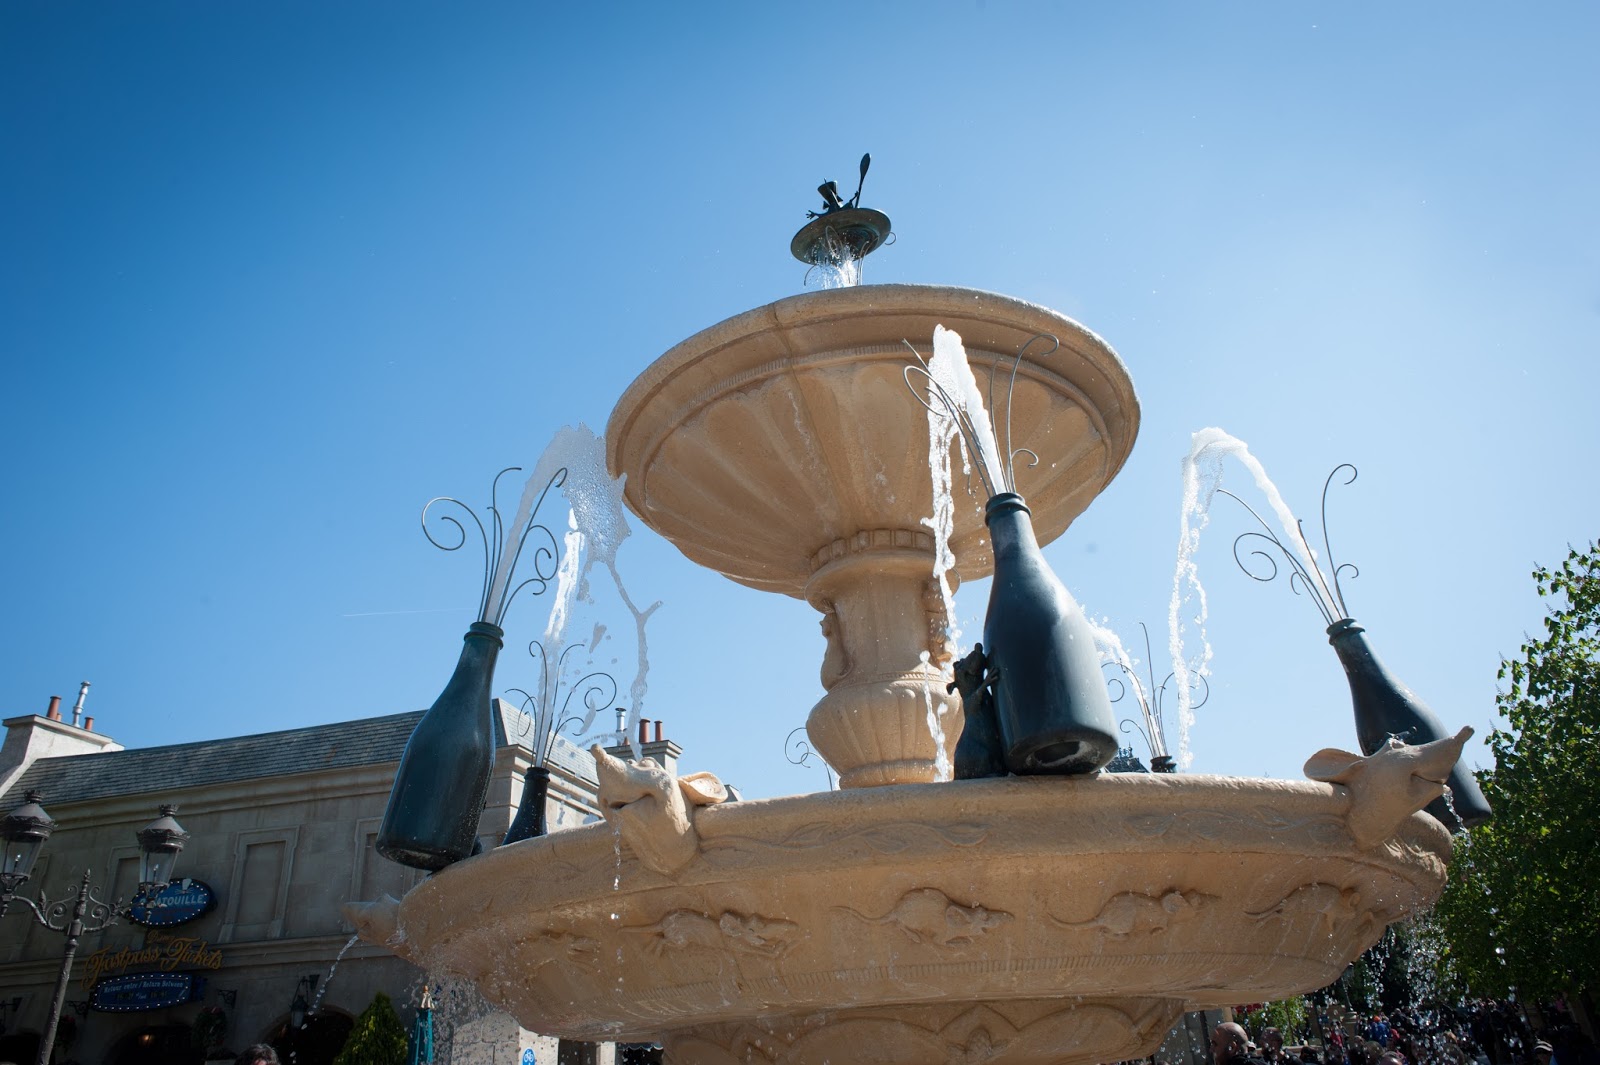 Fountain where the water spews from champagne bottles at Disneyland Paris in Marne-la-Vallée Outside Paris